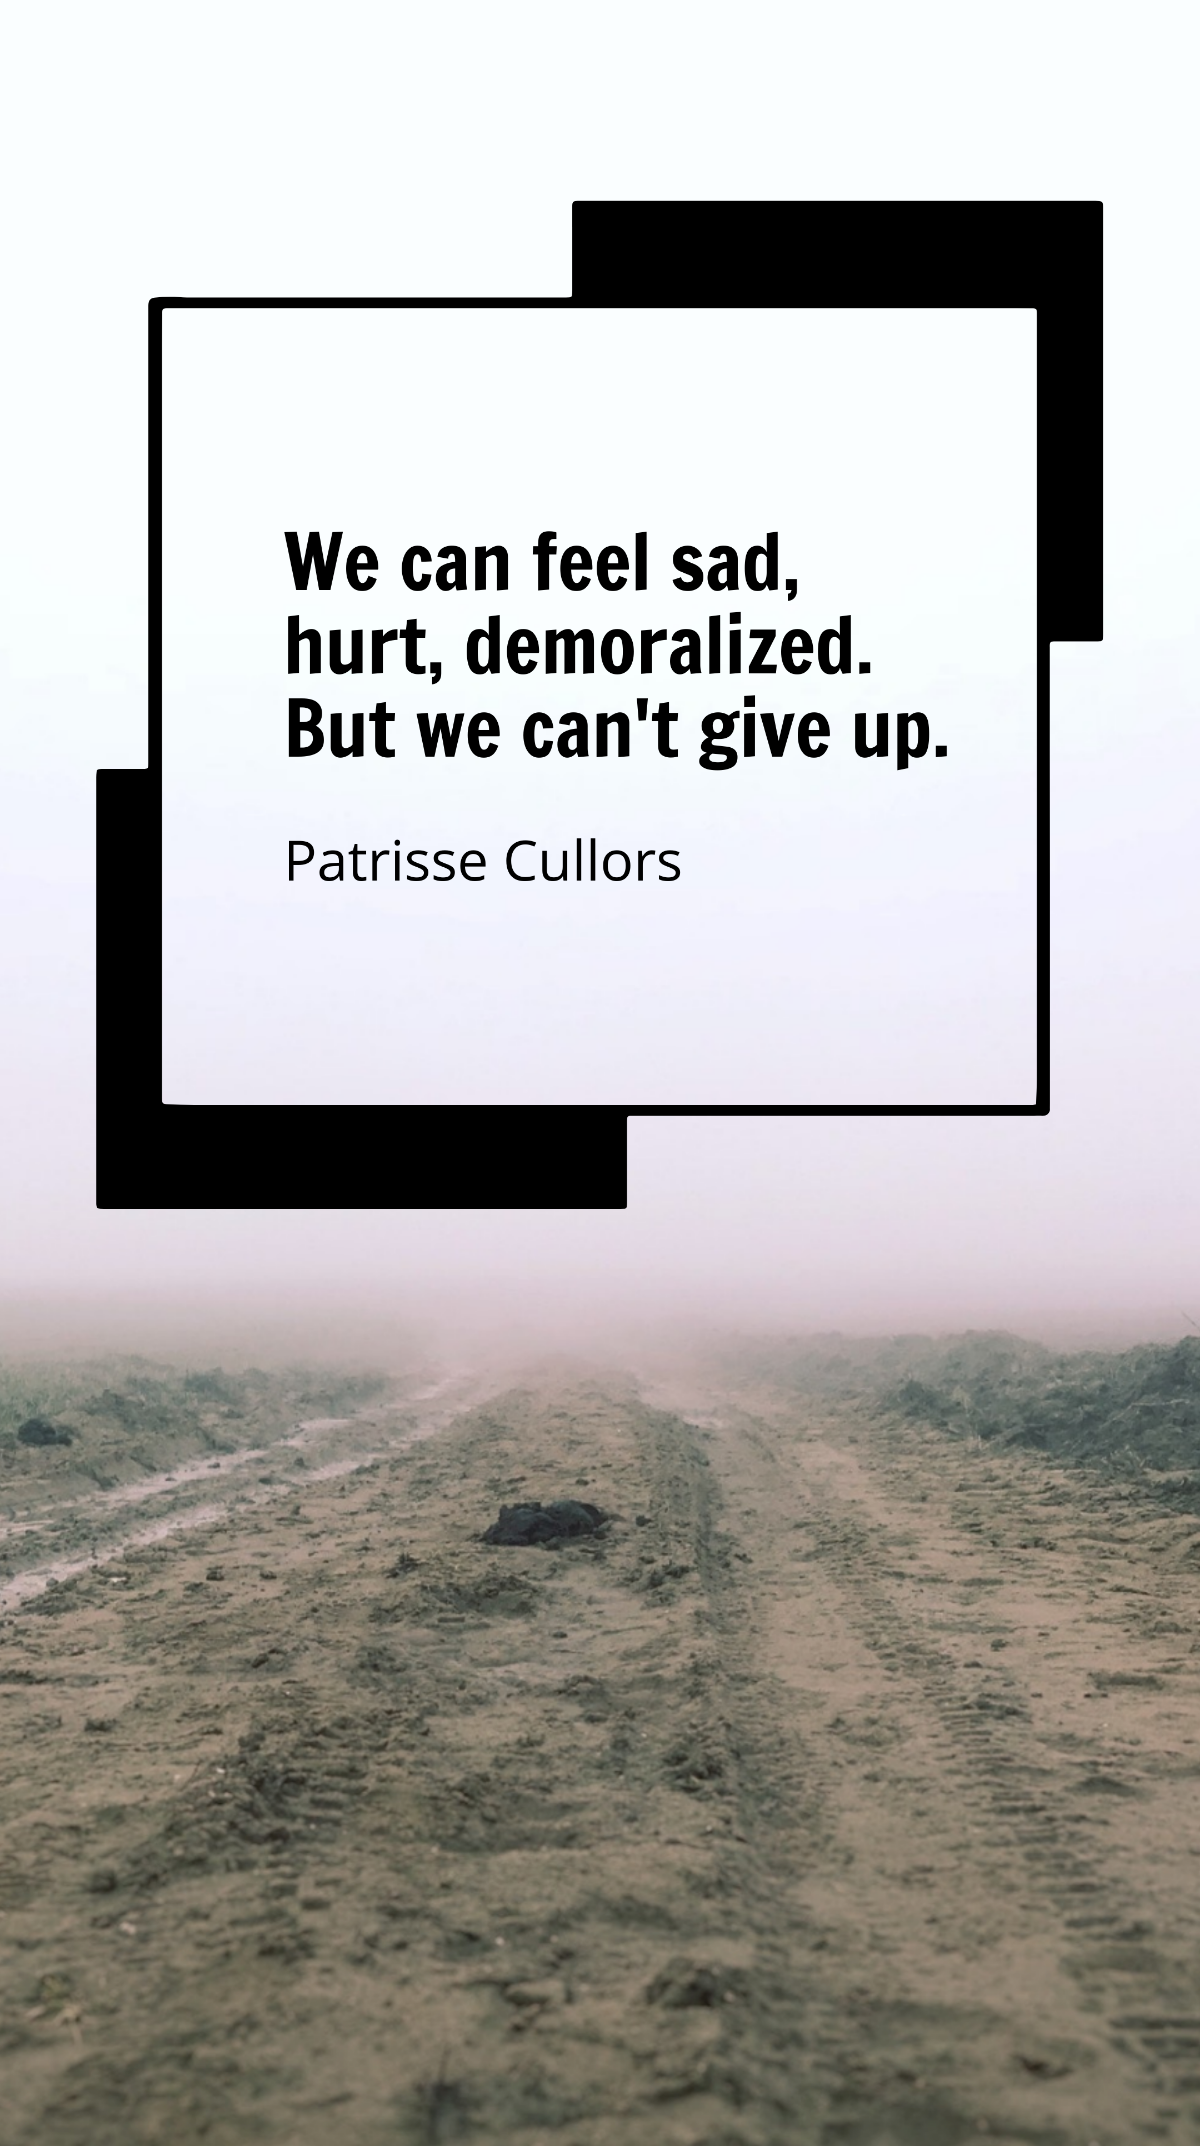 Patrisse Cullors - We can feel sad, hurt, demoralized. But we can't give up. Template